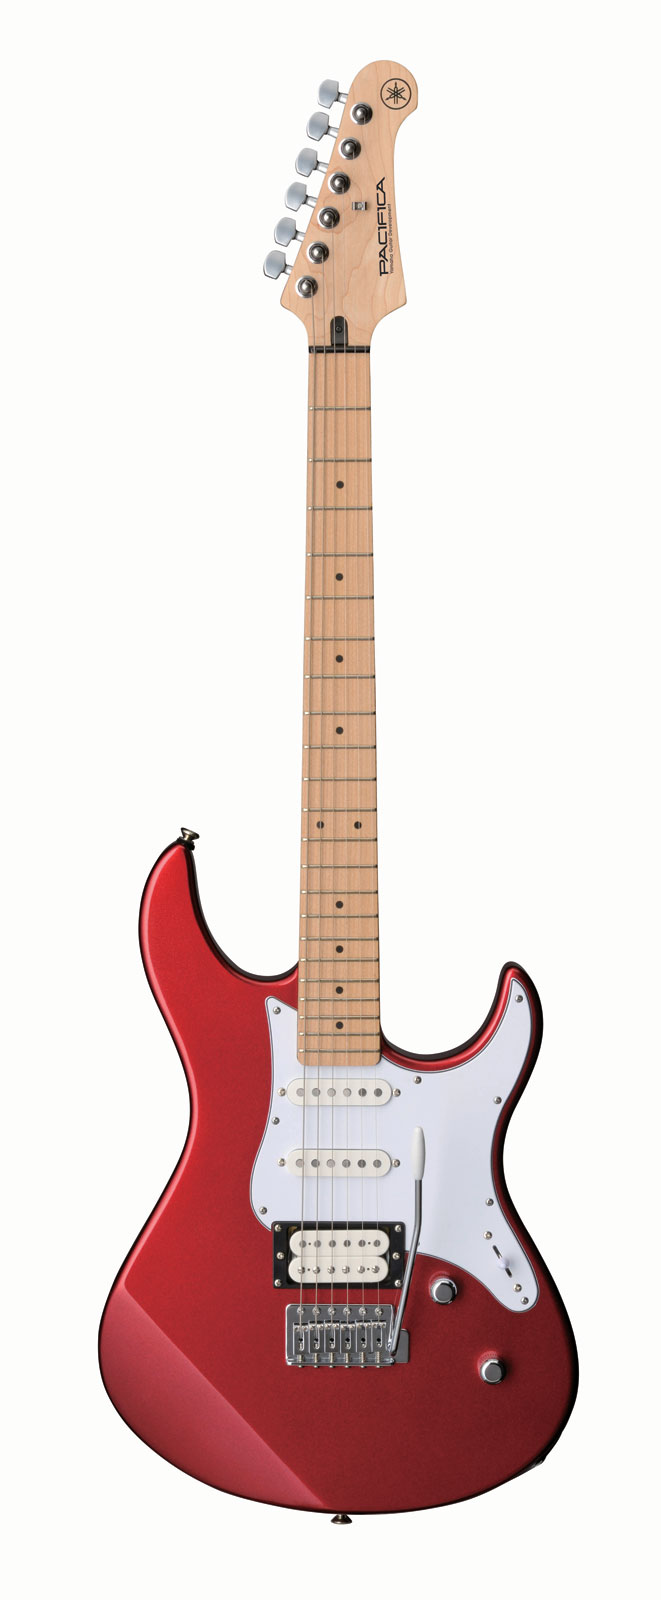 YAMAHA PACIFICA PA112VMRM RED METALLIC REMOTE LESSON